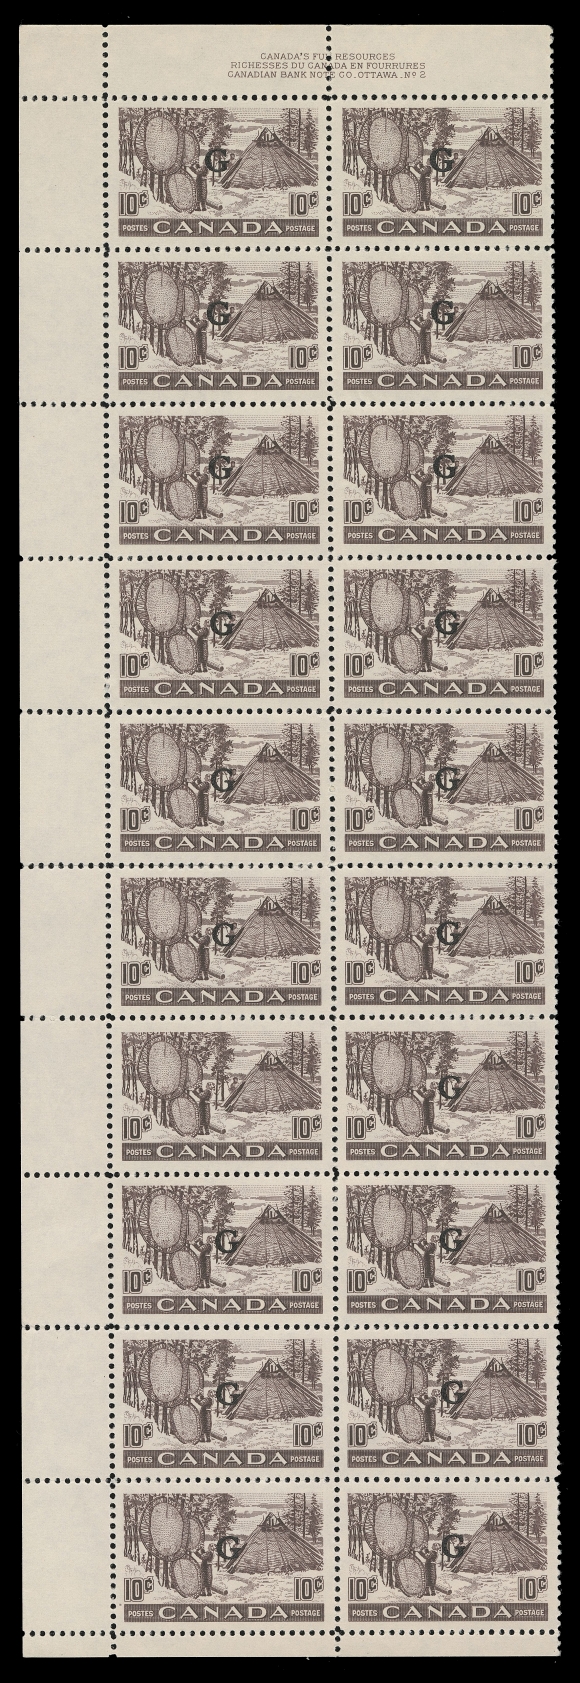 CANADA - 18 OFFICIALS  O26a,A mint Plate 2 strip of twenty MISSING "G" OVERPRINT on Position 31 (first stamp of seventh row), very well centered and fresh, folded horizontally between fifth and sixth rows with some split perfs; an appealing and scarce positional block with the error, VF NH; clear 2020 Greene Foundation cert.